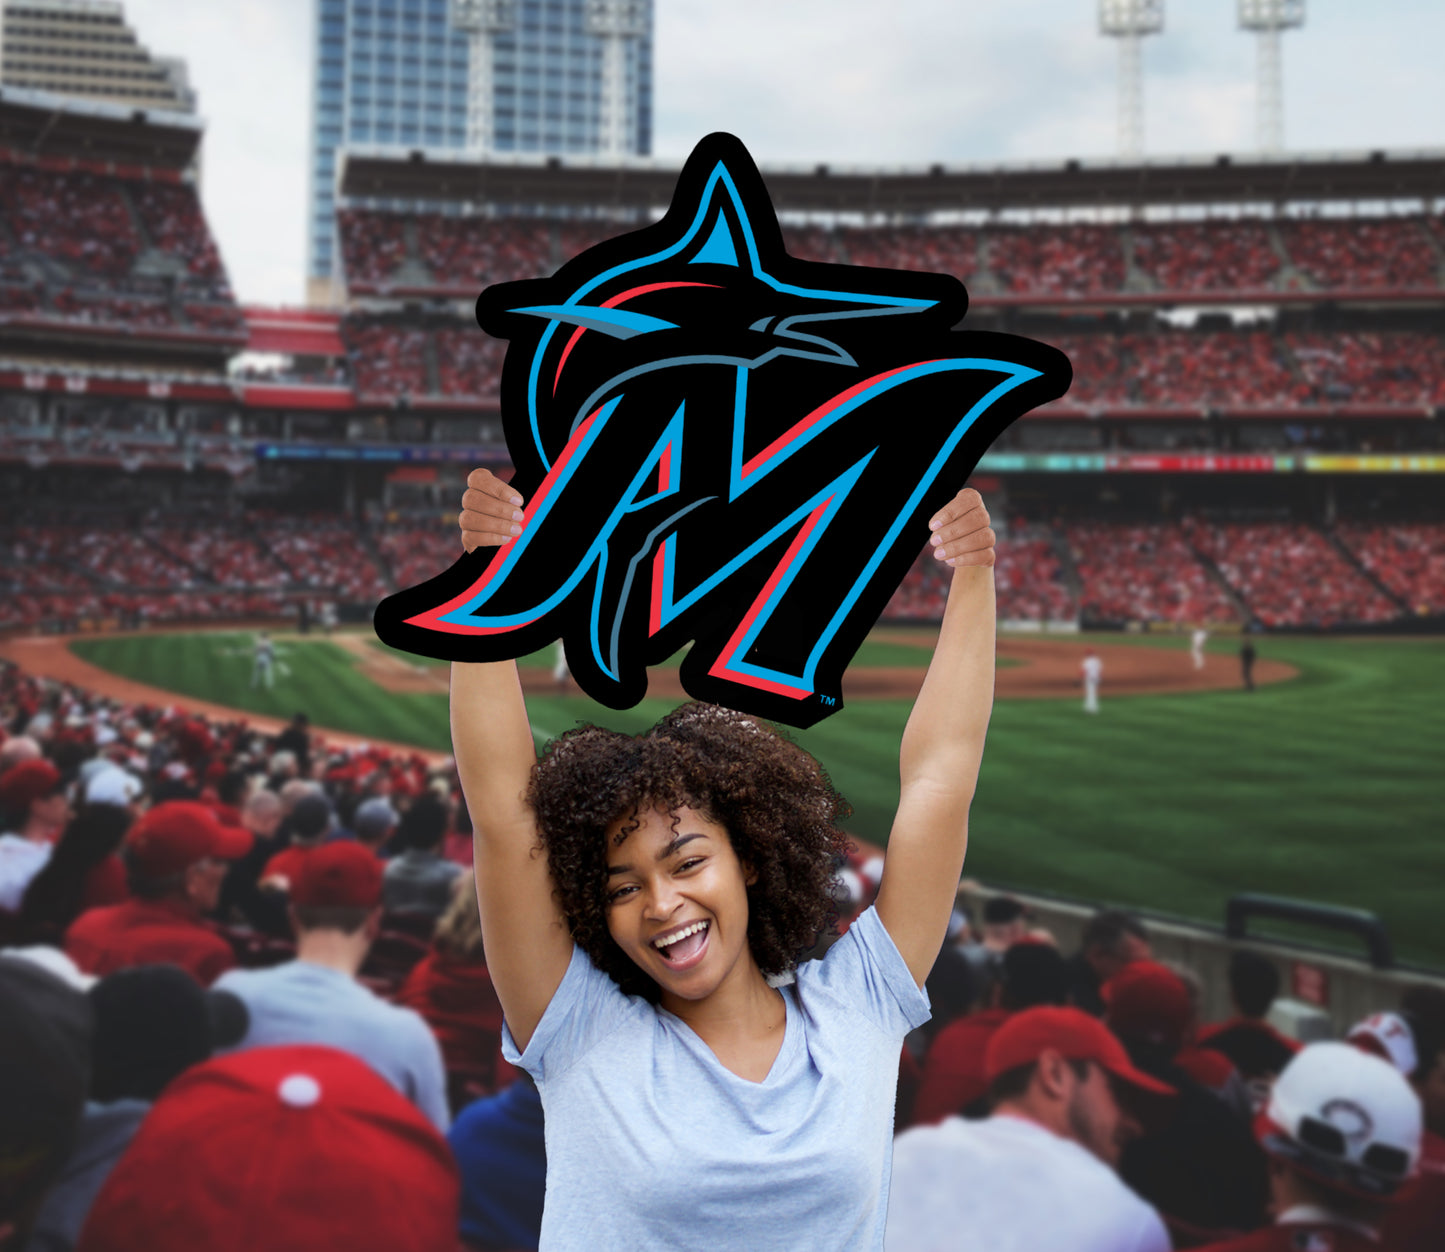 Miami Marlins: 2021 Logo Foam Core Cutout - Officially Licensed